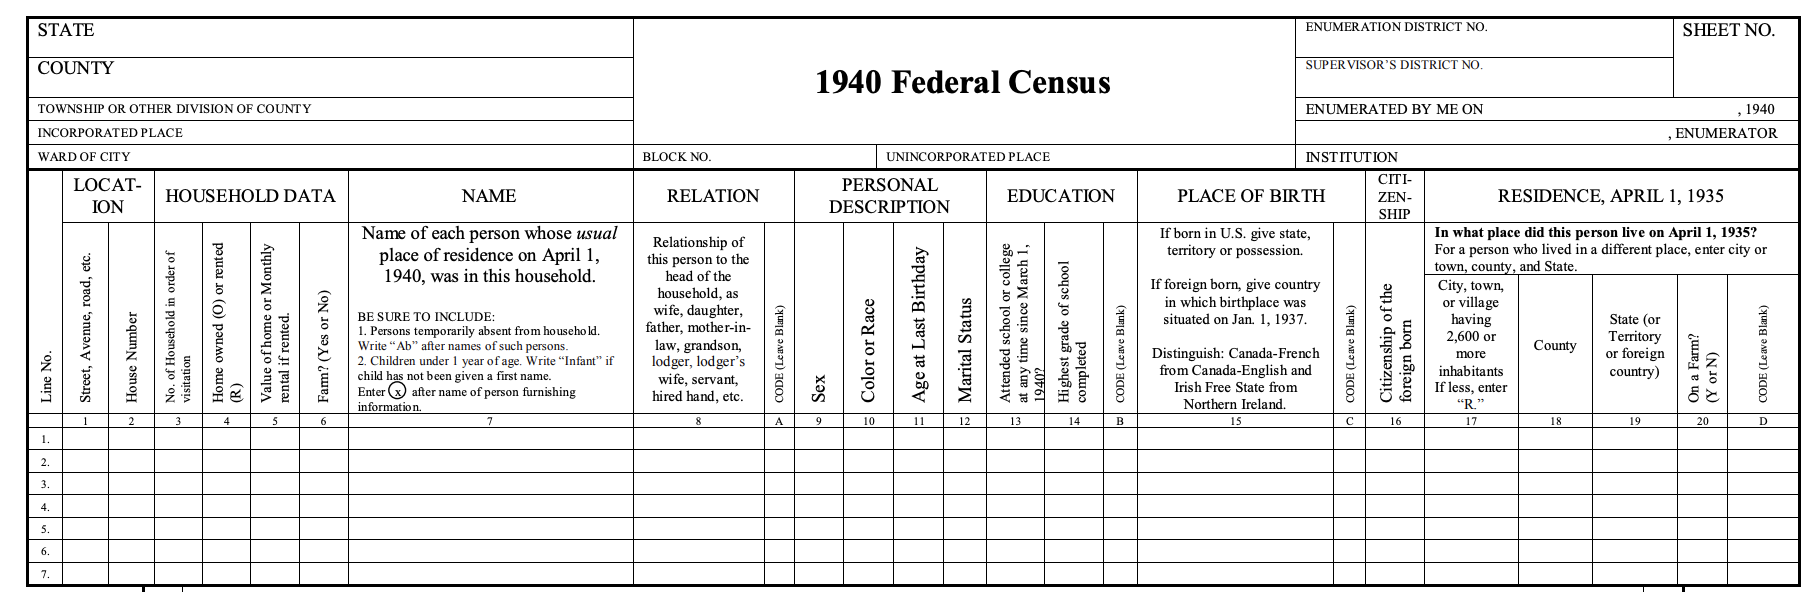 Tips for Getting the Most Out of the 1940 Census